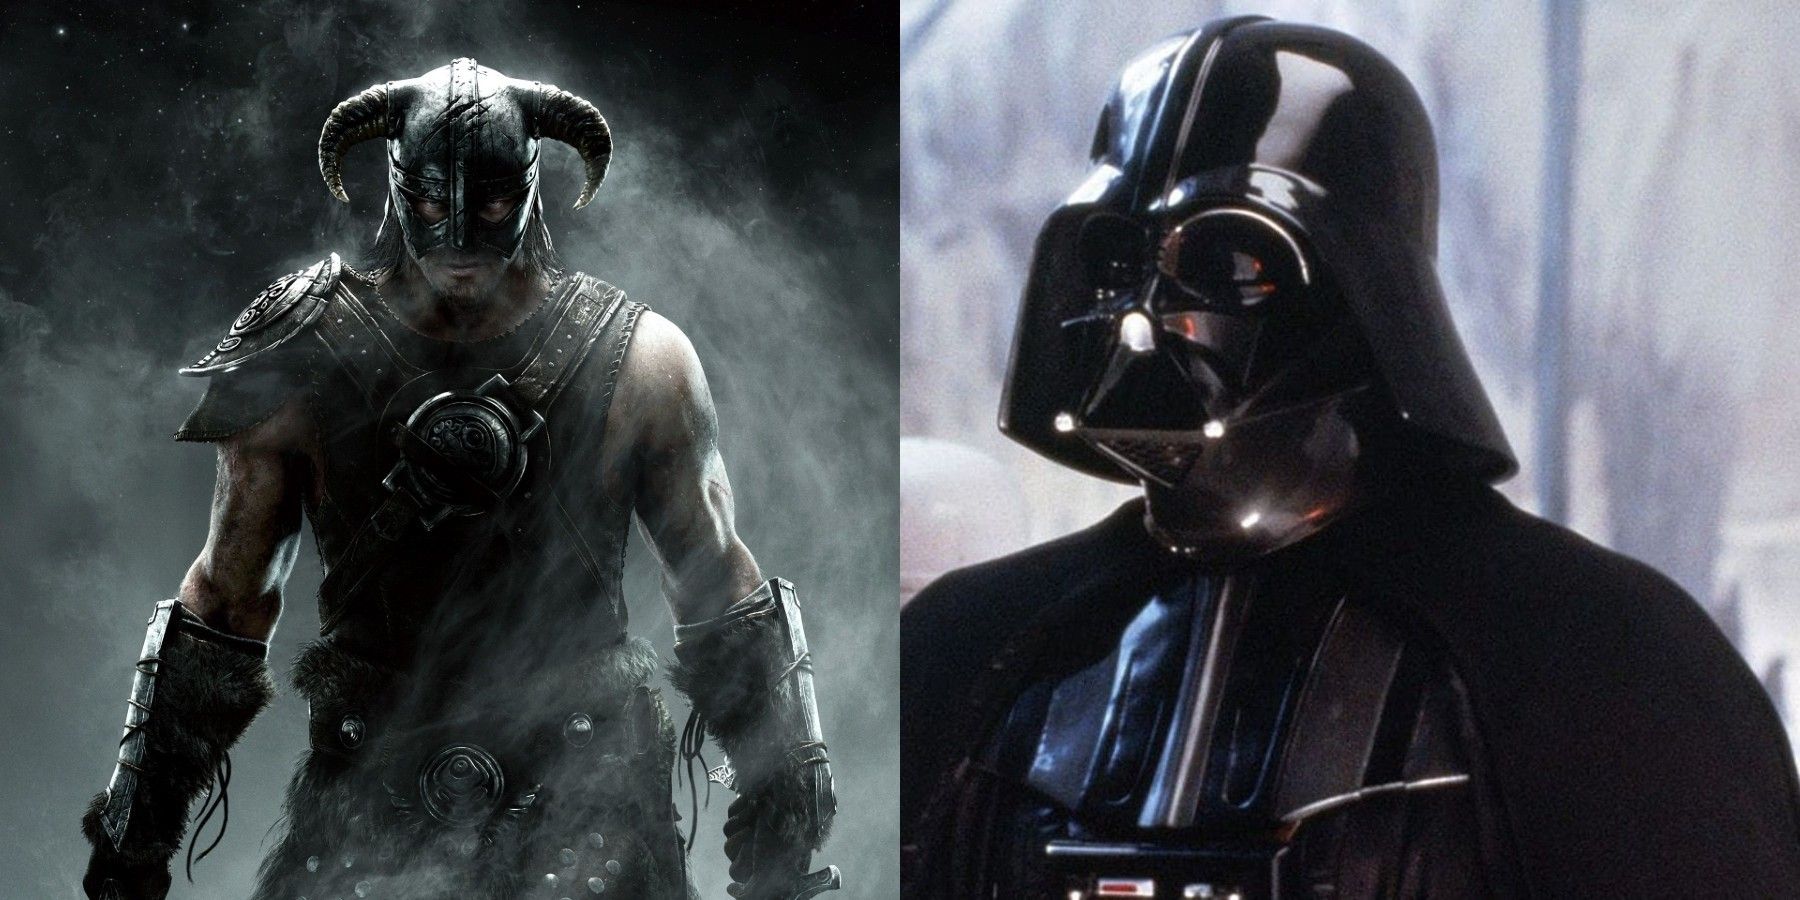 Skyrim Player Uses Mods to Turn the Game Into Star Wars